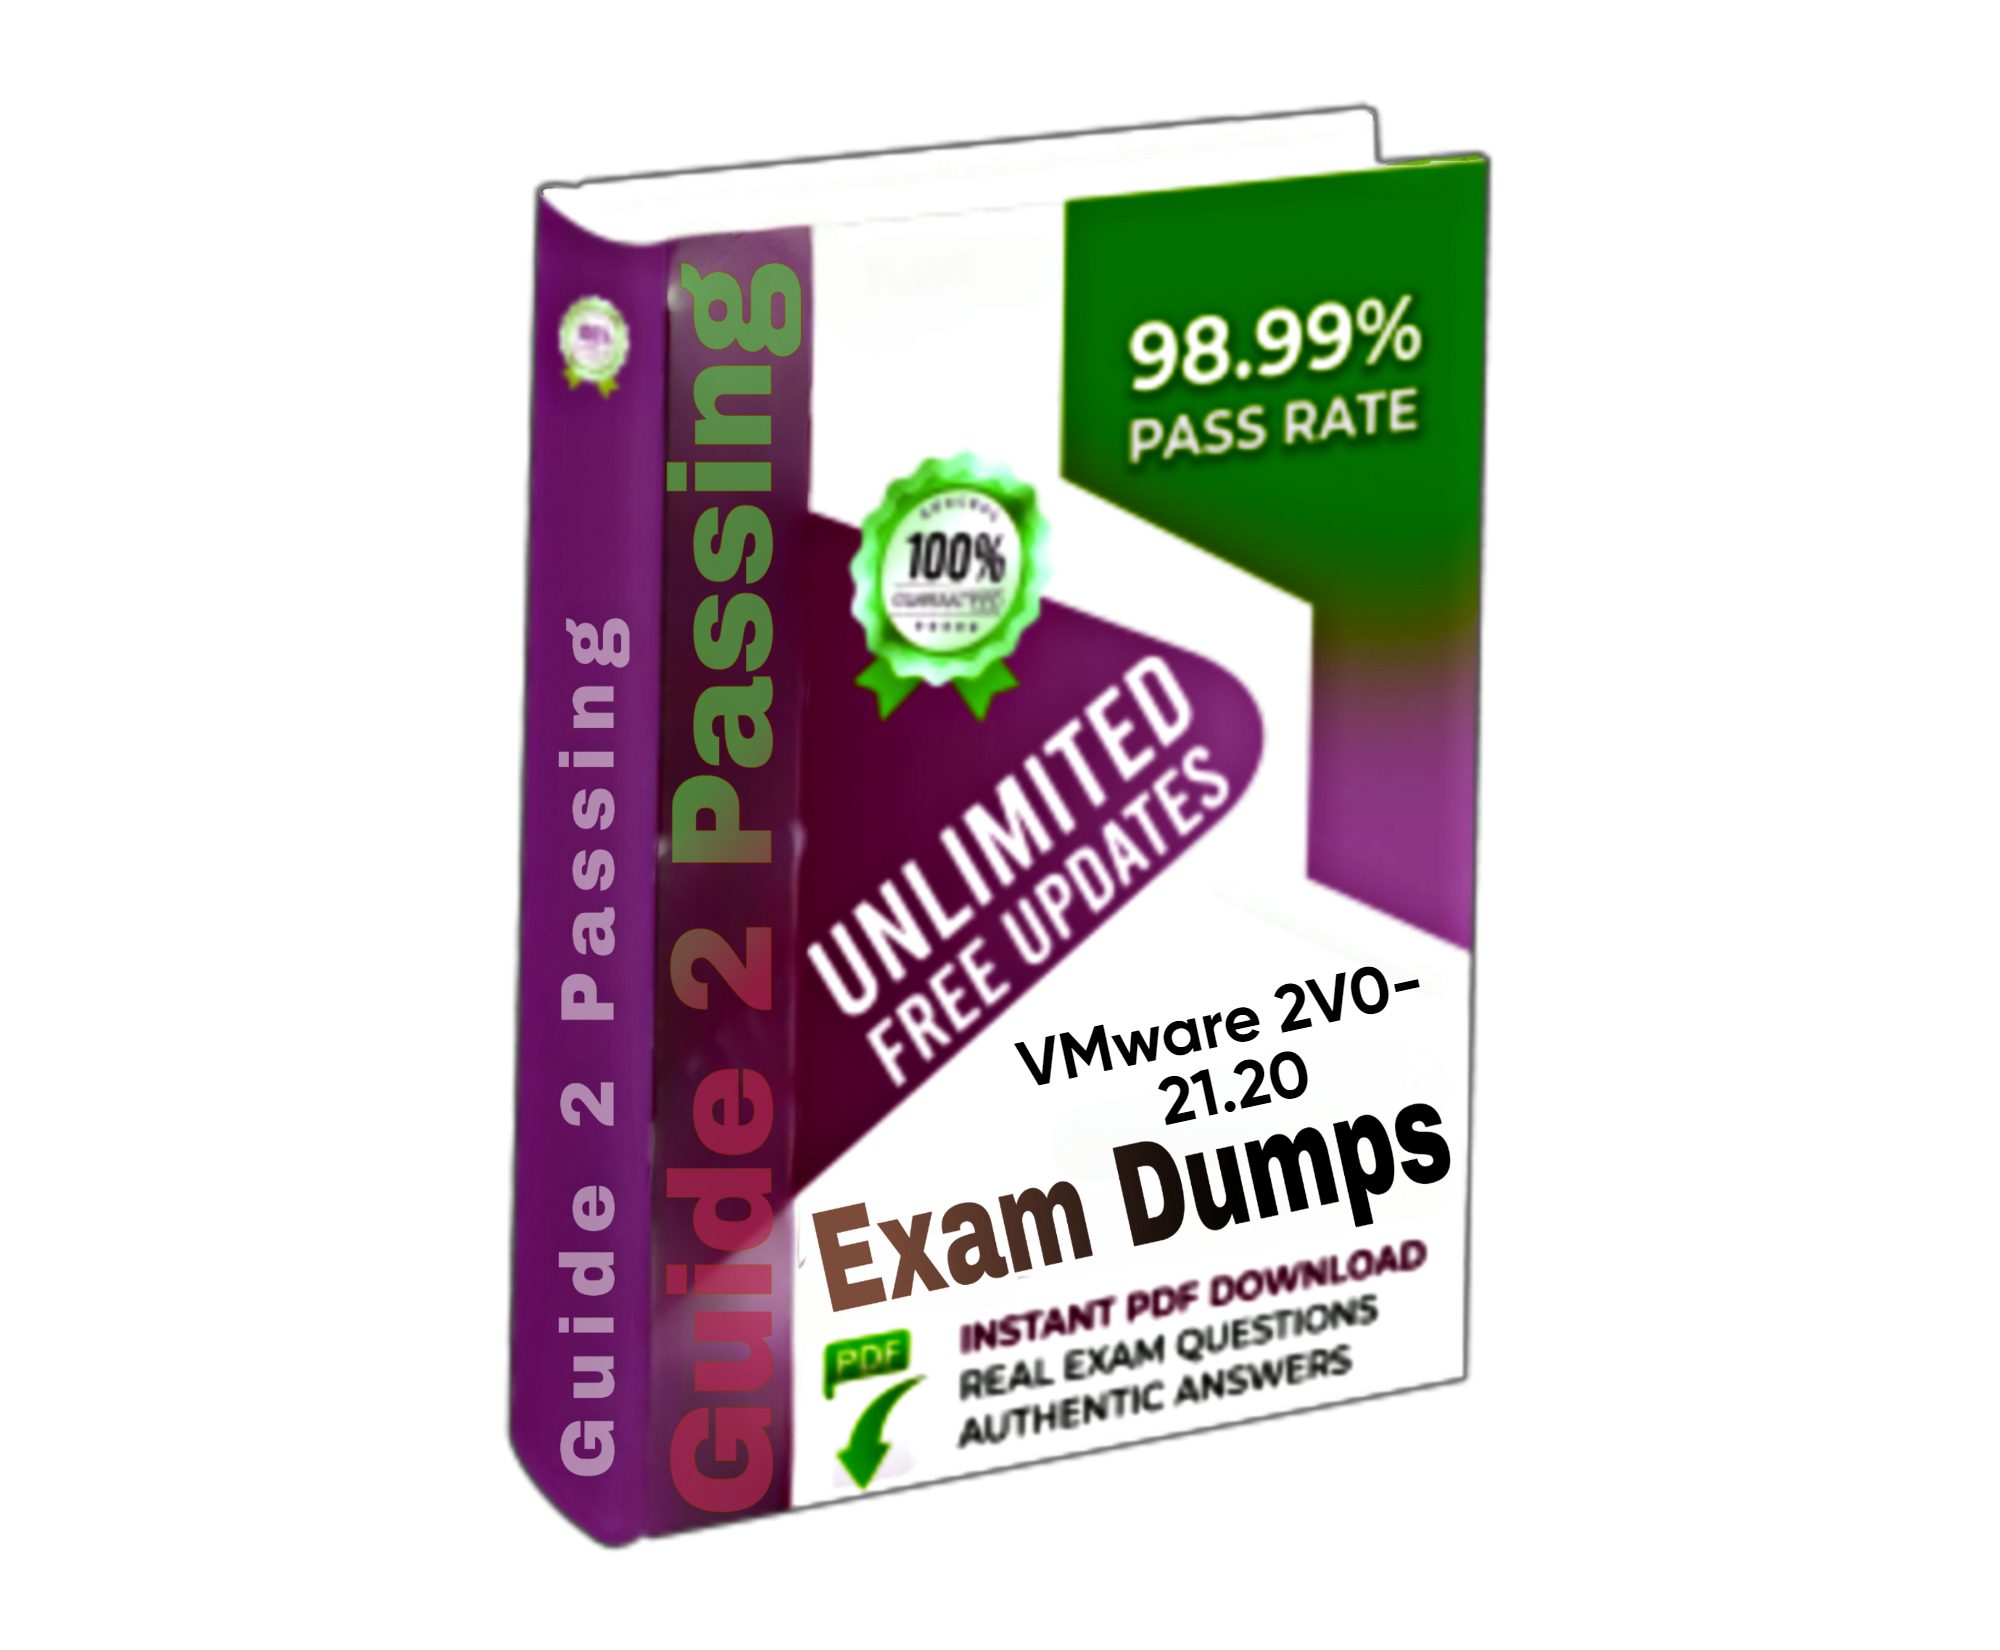 Pass Your VMware 2V0-21.20 Exam Dumps From Guide 2 Passing